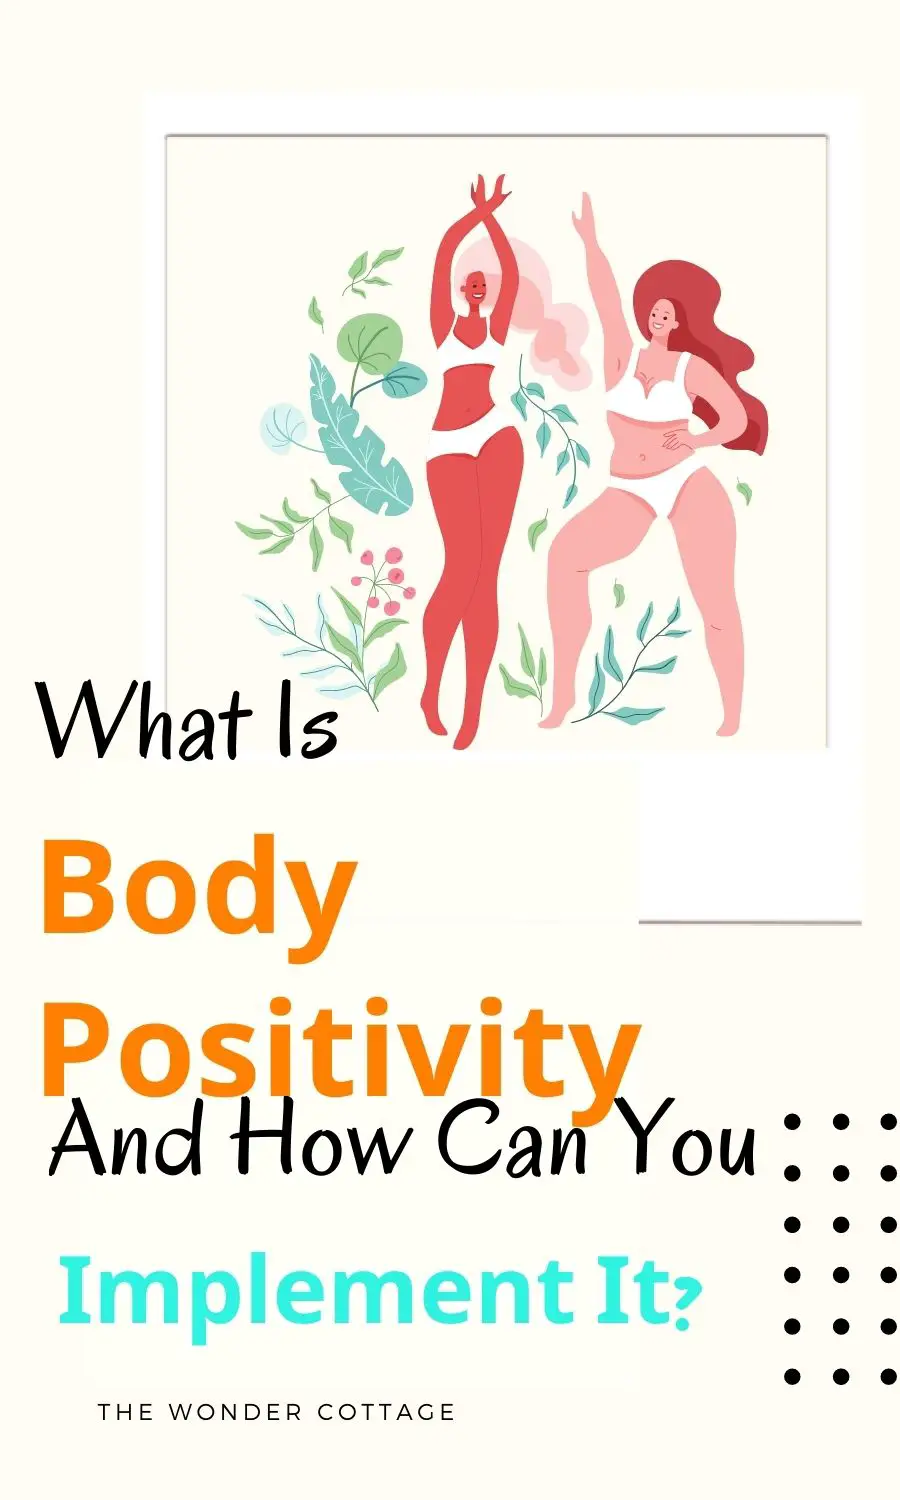 What Is Body Positivity And How Can You Implement It?